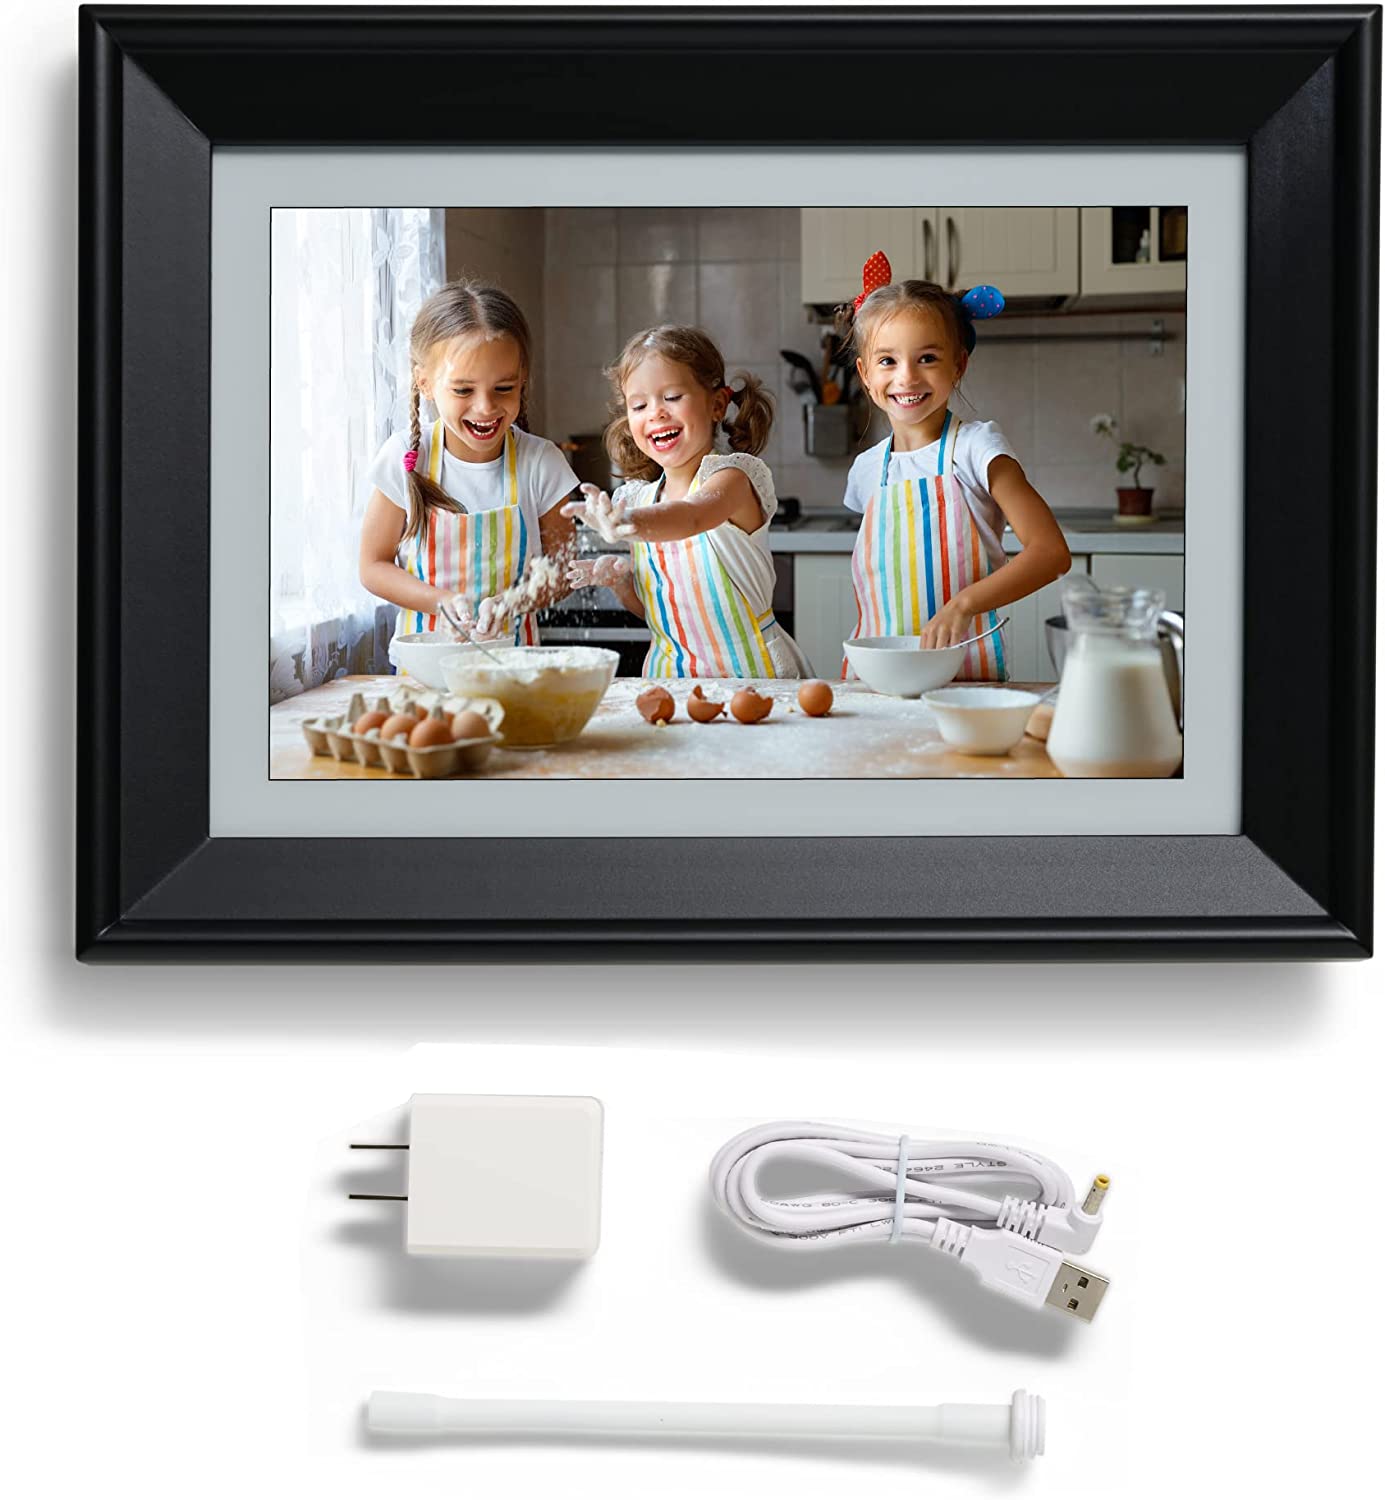 PhotoSpring WiFi Cloud Digital Picture Frame, 10-inch